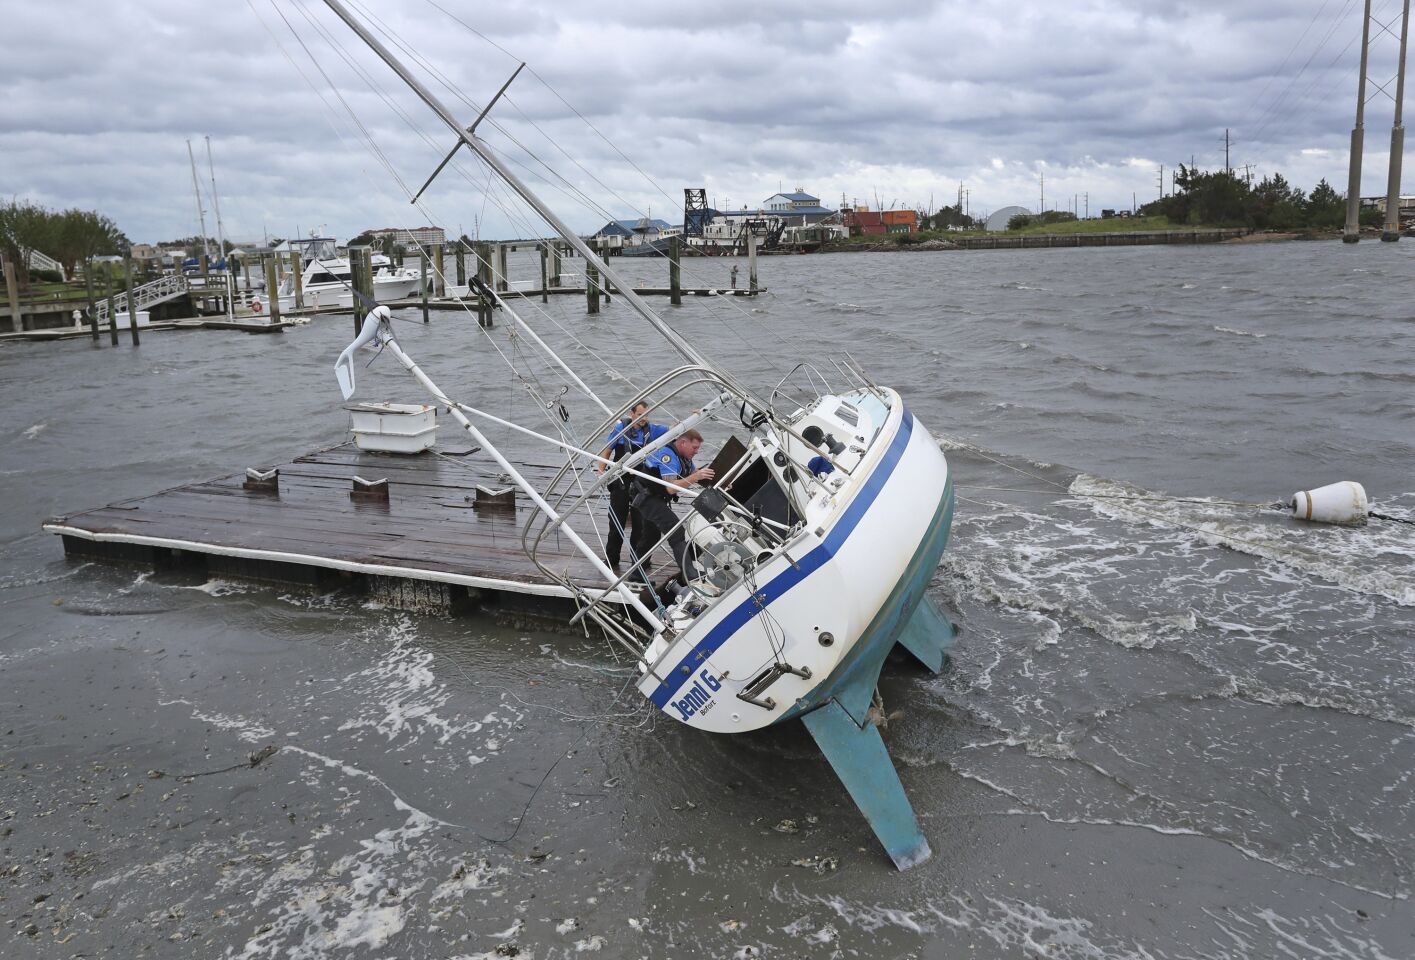 Beaufort Police Officer Curtis Resor, left, and Sgt. Micheal Stepehens check a sailboat for occupants in Beaufort, N.C. after Hurricane Dorian passed the North Carolina coast.